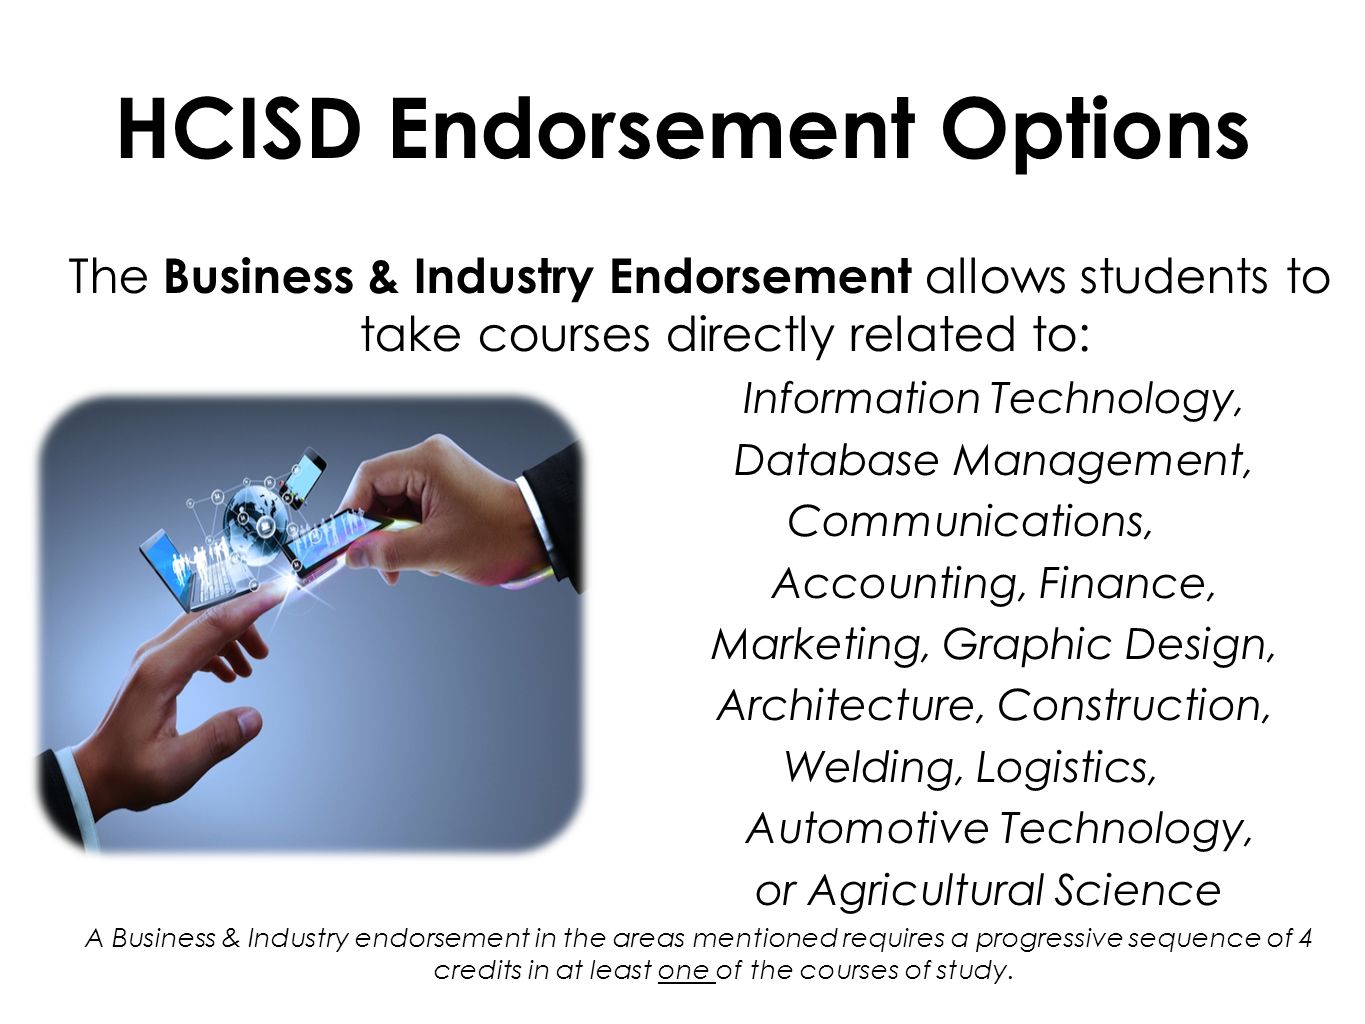 HCISD Endorsement Options The Business & Industry Endorsement allows students to take courses directly related to: Information Technology, Database Management, Communications, Accounting, Finance, Marketing, Graphic Design, Architecture, Construction, Welding, Logistics, Automotive Technology, or Agricultural Science A Business & Industry endorsement in the areas mentioned requires a progressive sequence of 4 credits in at least one of the courses of study.